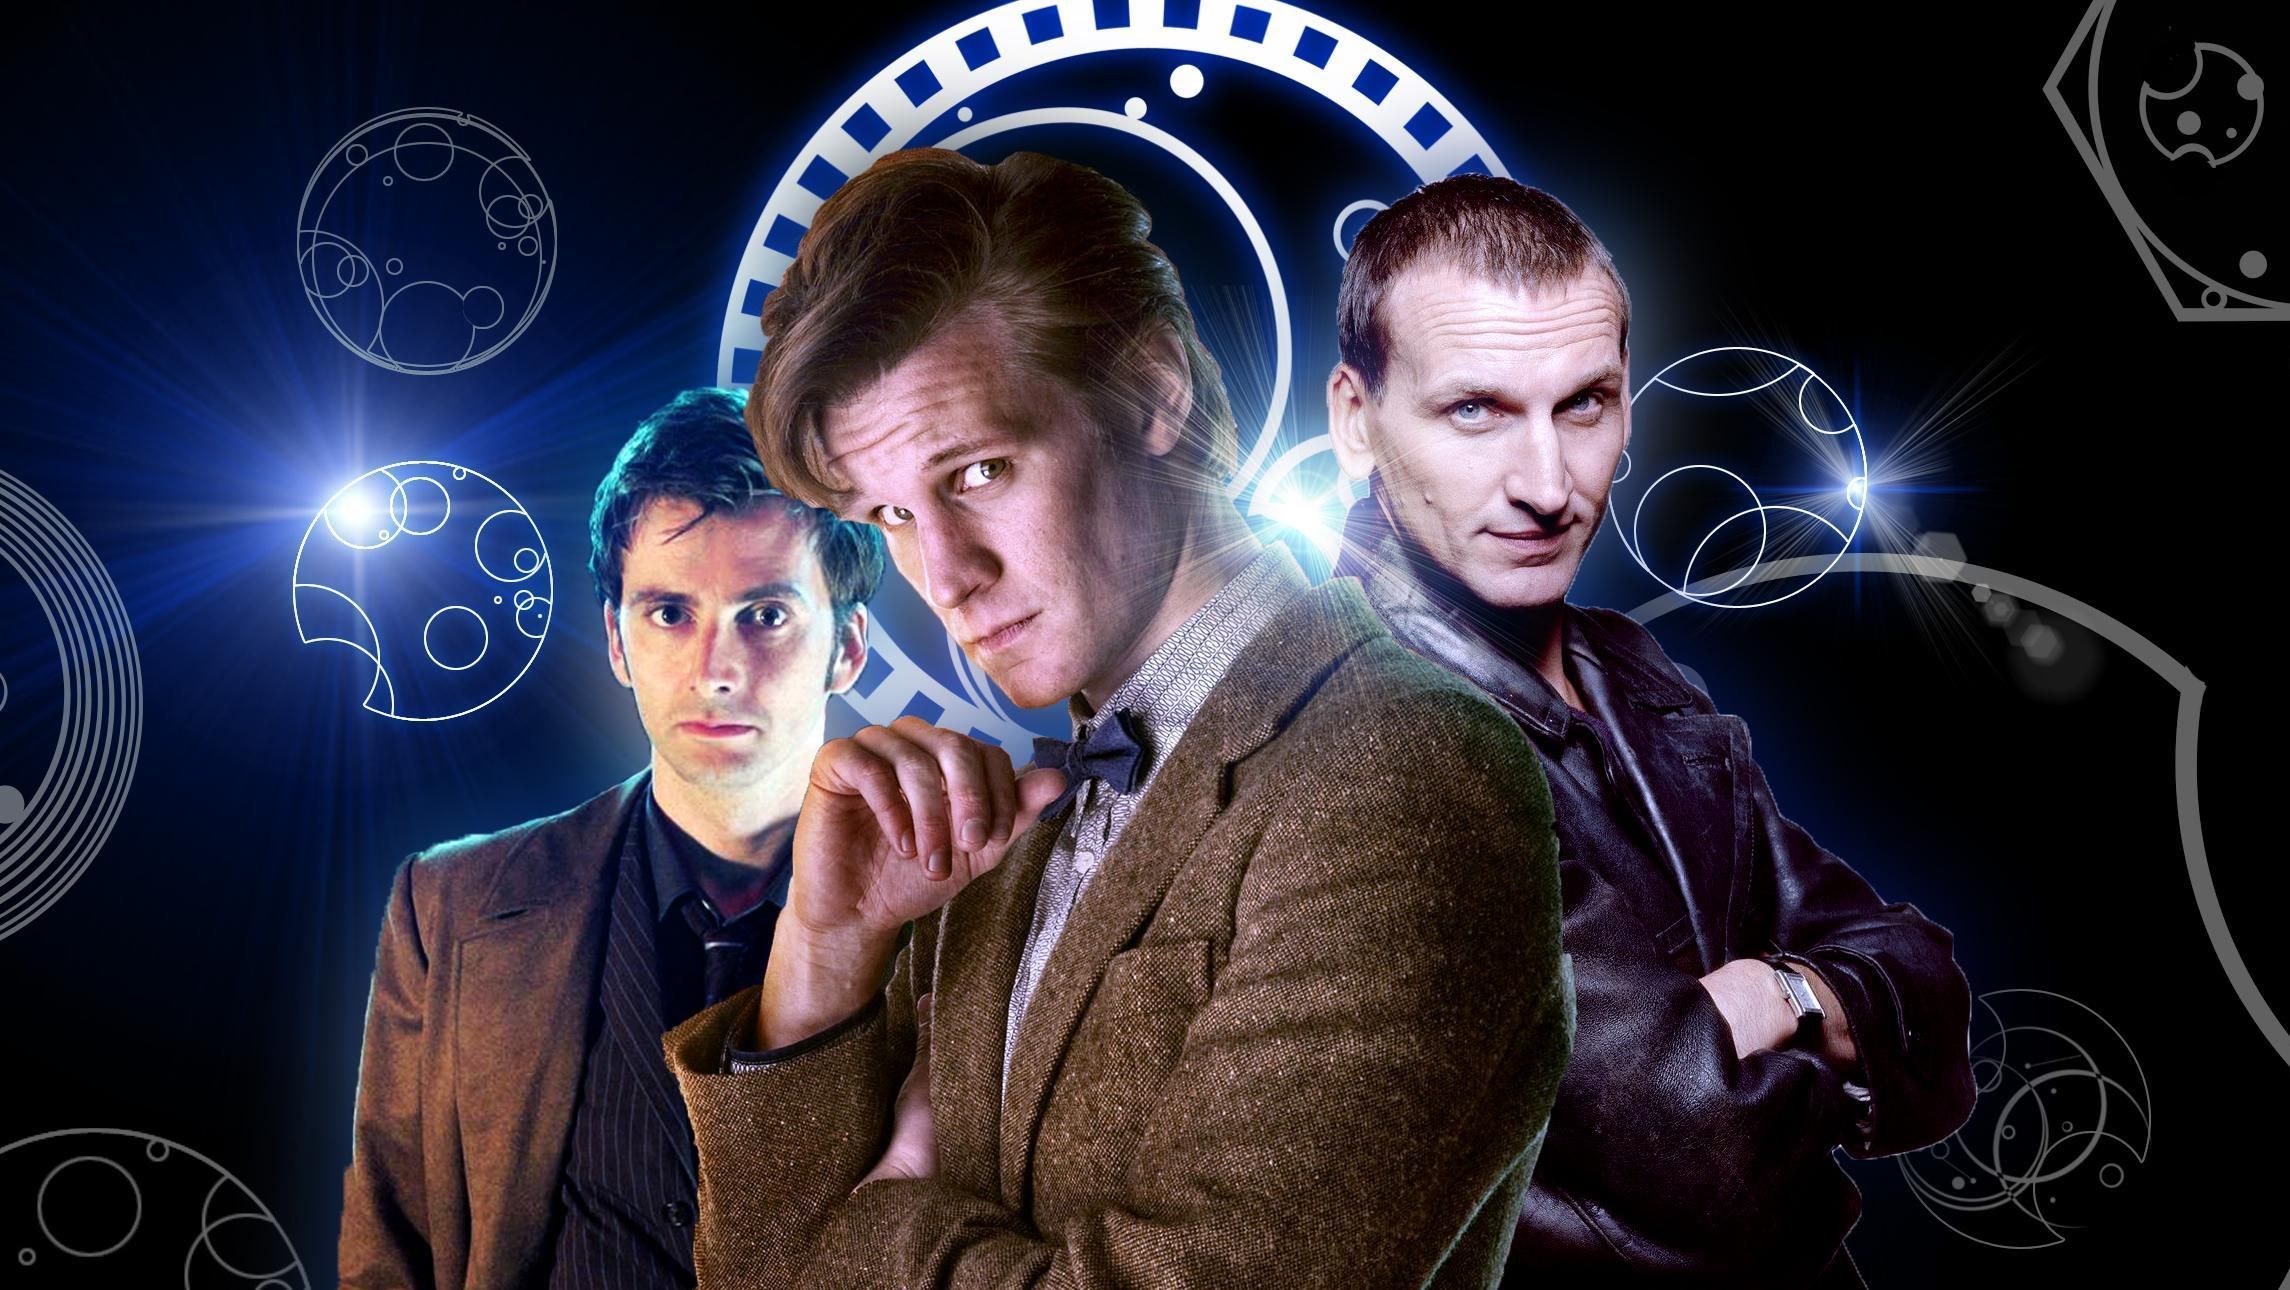 doctor who wallpapers 1920x1080